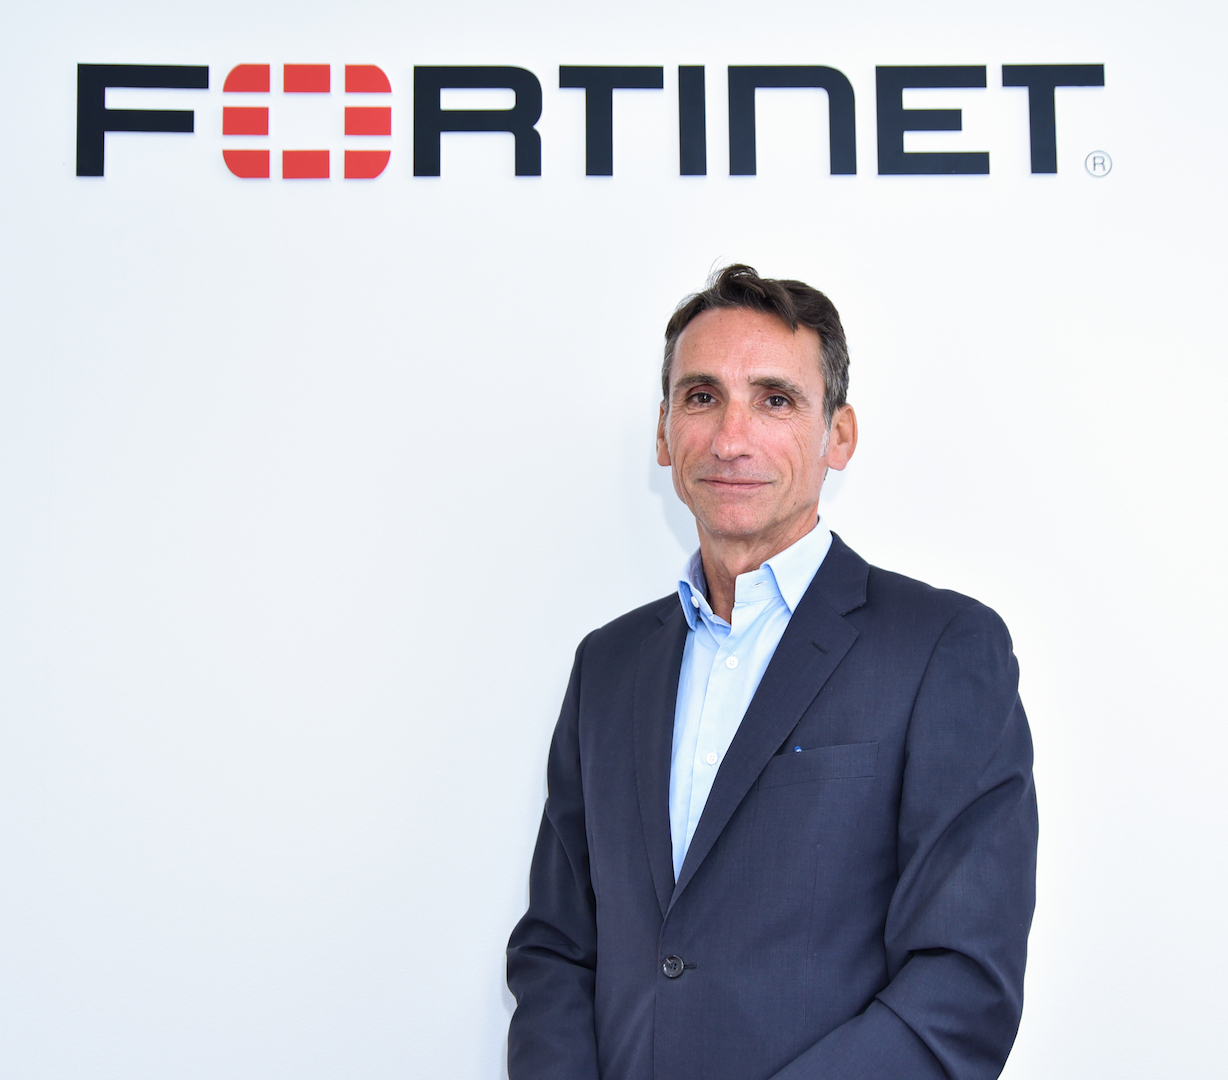 Fortinet expert on the importance of collaboration in cybersecurity